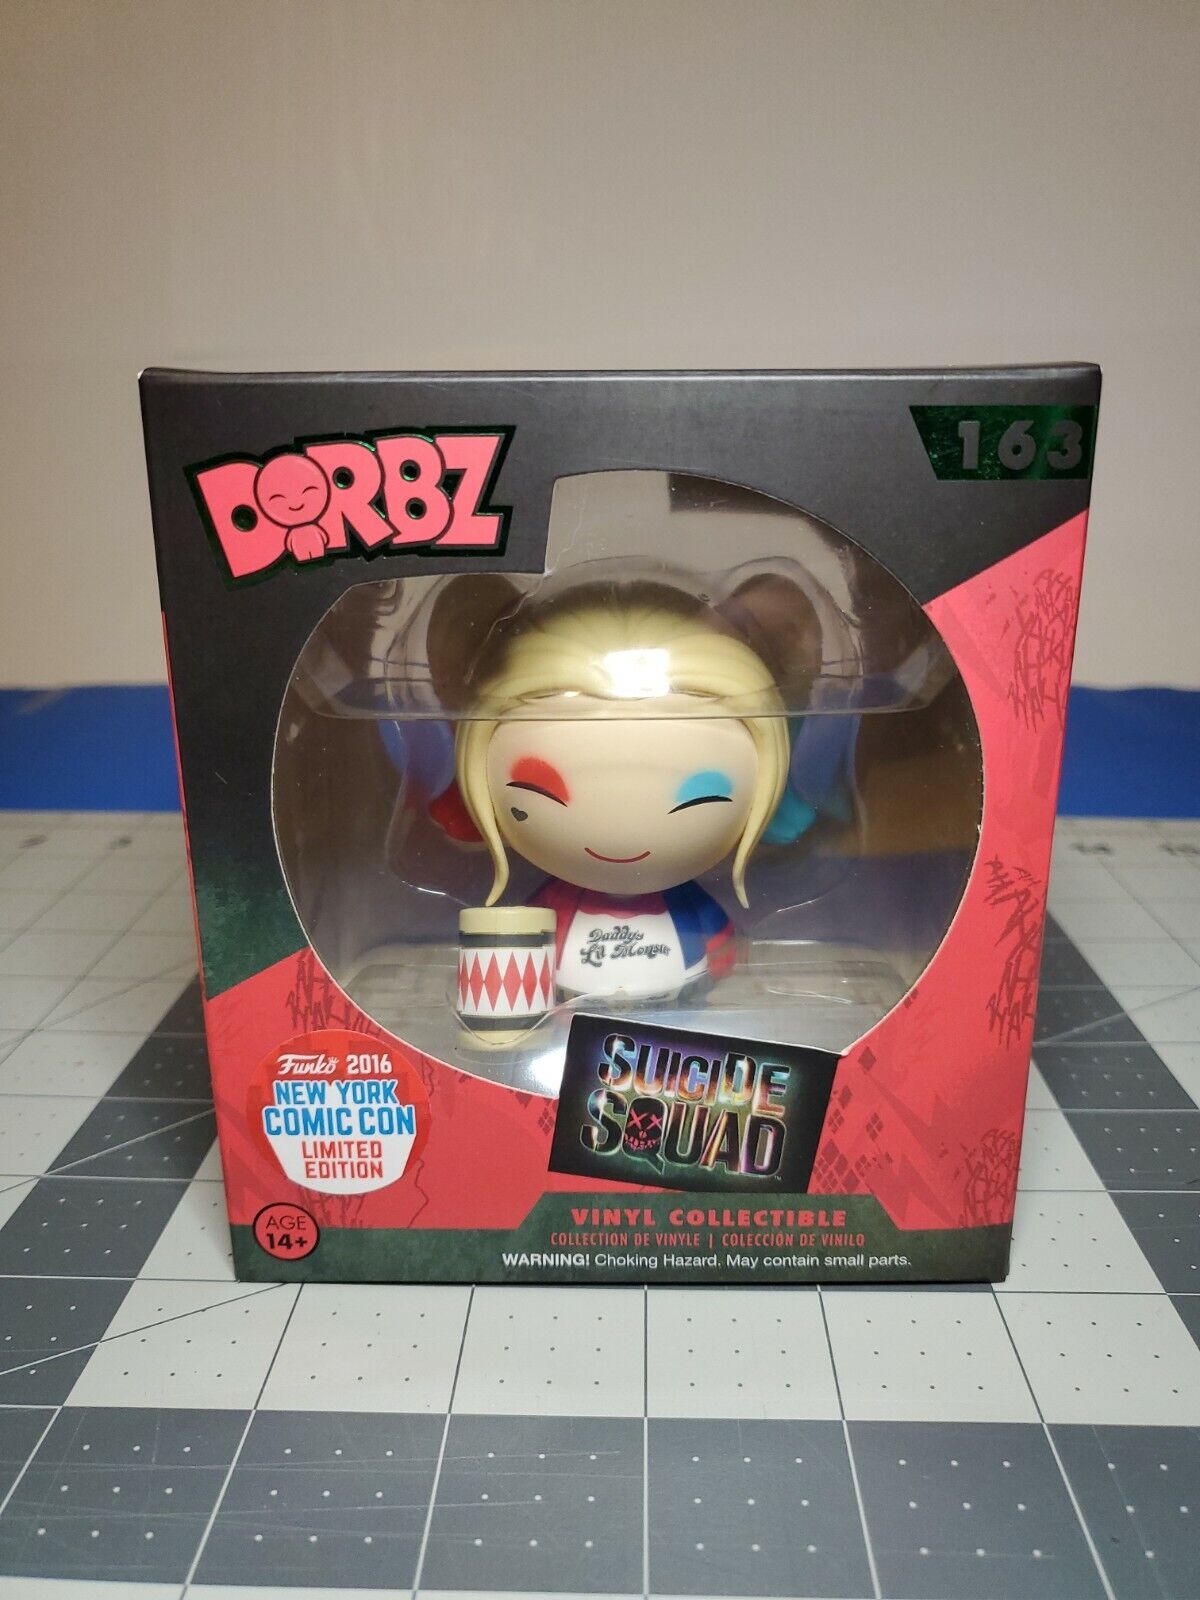 Dorbz Suicide Squad Harley Quinn #163 2016 New York Comic Con Limited Edition